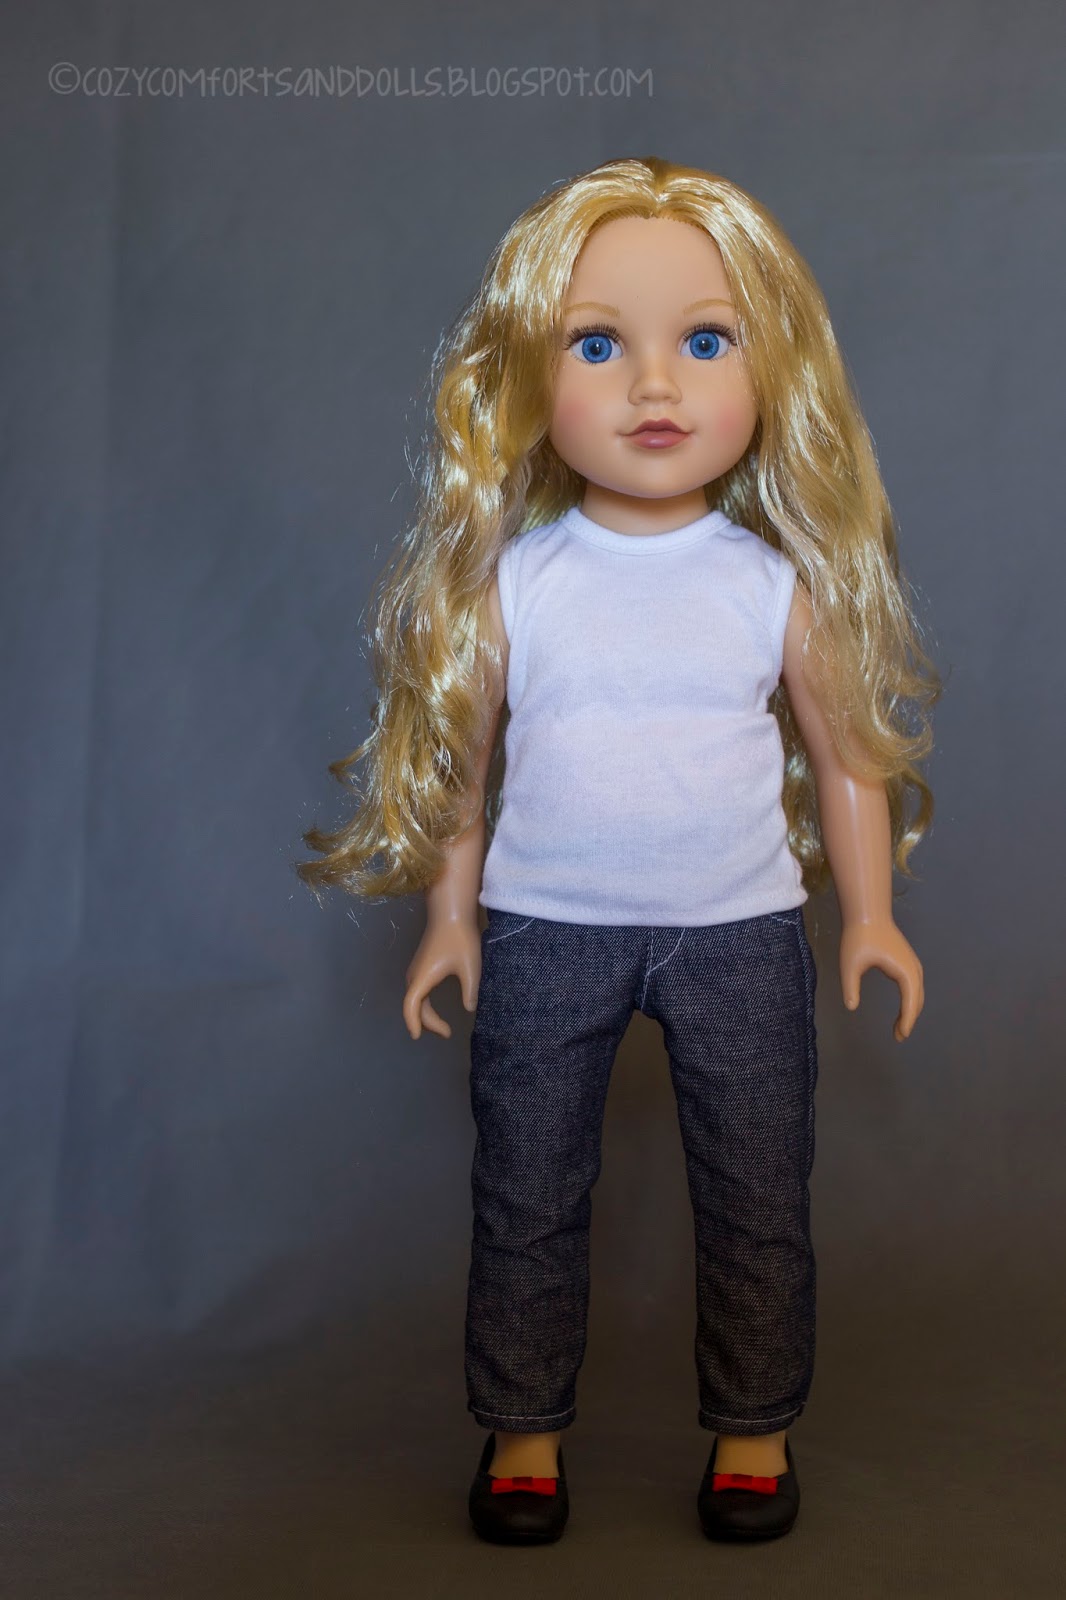 Cozy Comforts and Dolls: Journey Girls 18 inch Dolls-Meredith